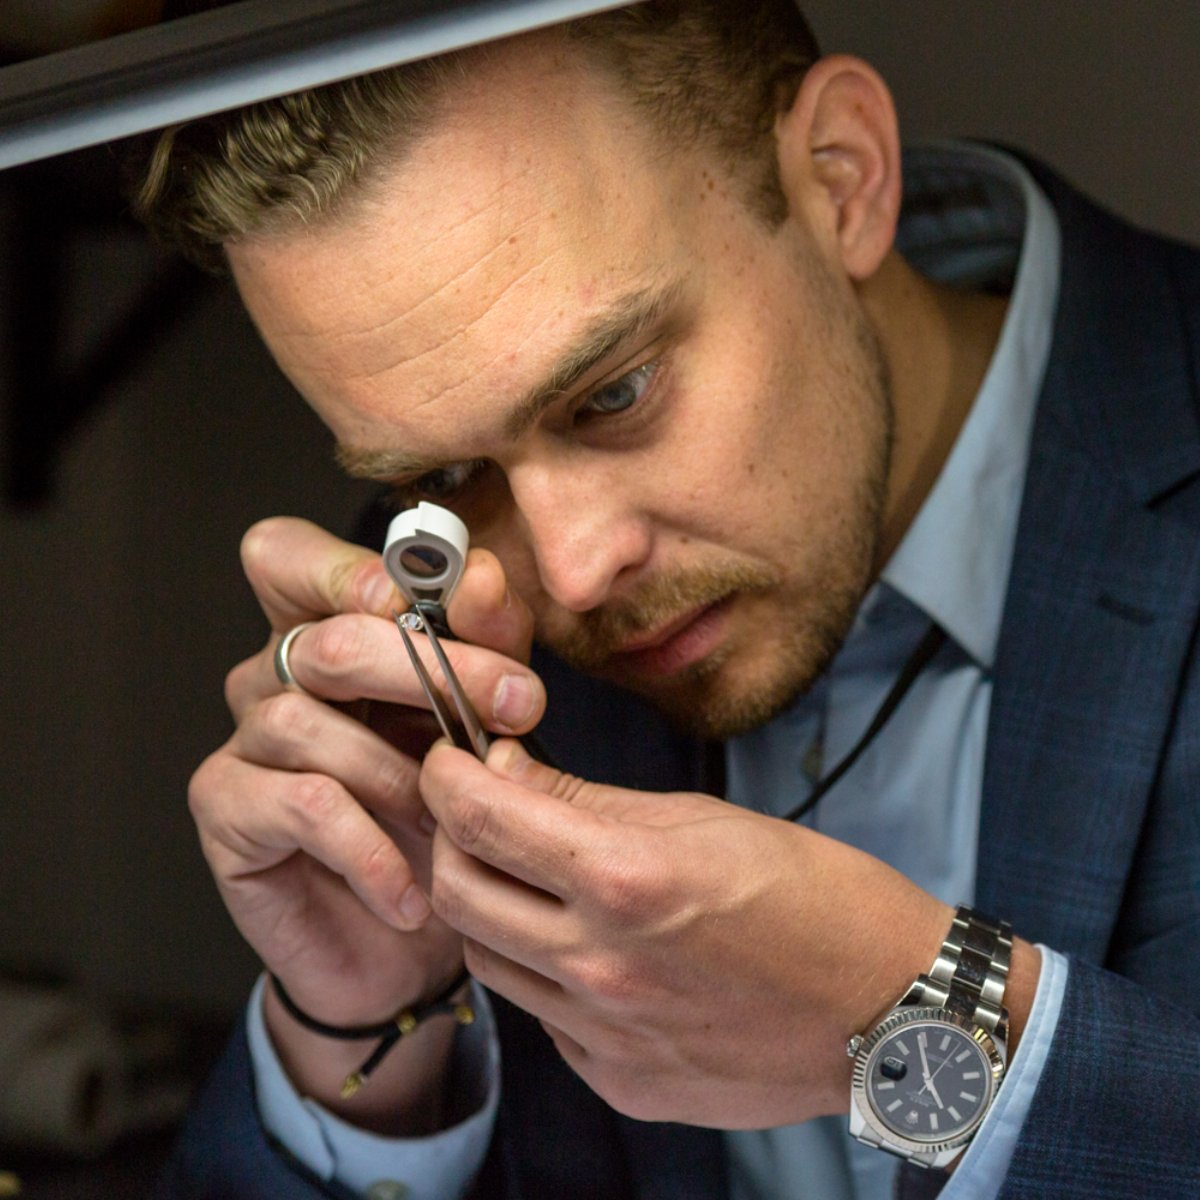 Need an appraisal? Our GIA-certified gemologist will provide an expert opinion that you can feel confident in. #sandiego #sandiegoliving #sandiegosbest #sandiegosbestjeweler #sandiegojewelry #sandiegojewelrydesigner #sandiegojeweler #sandiegojewelers #diamonds #diamondring